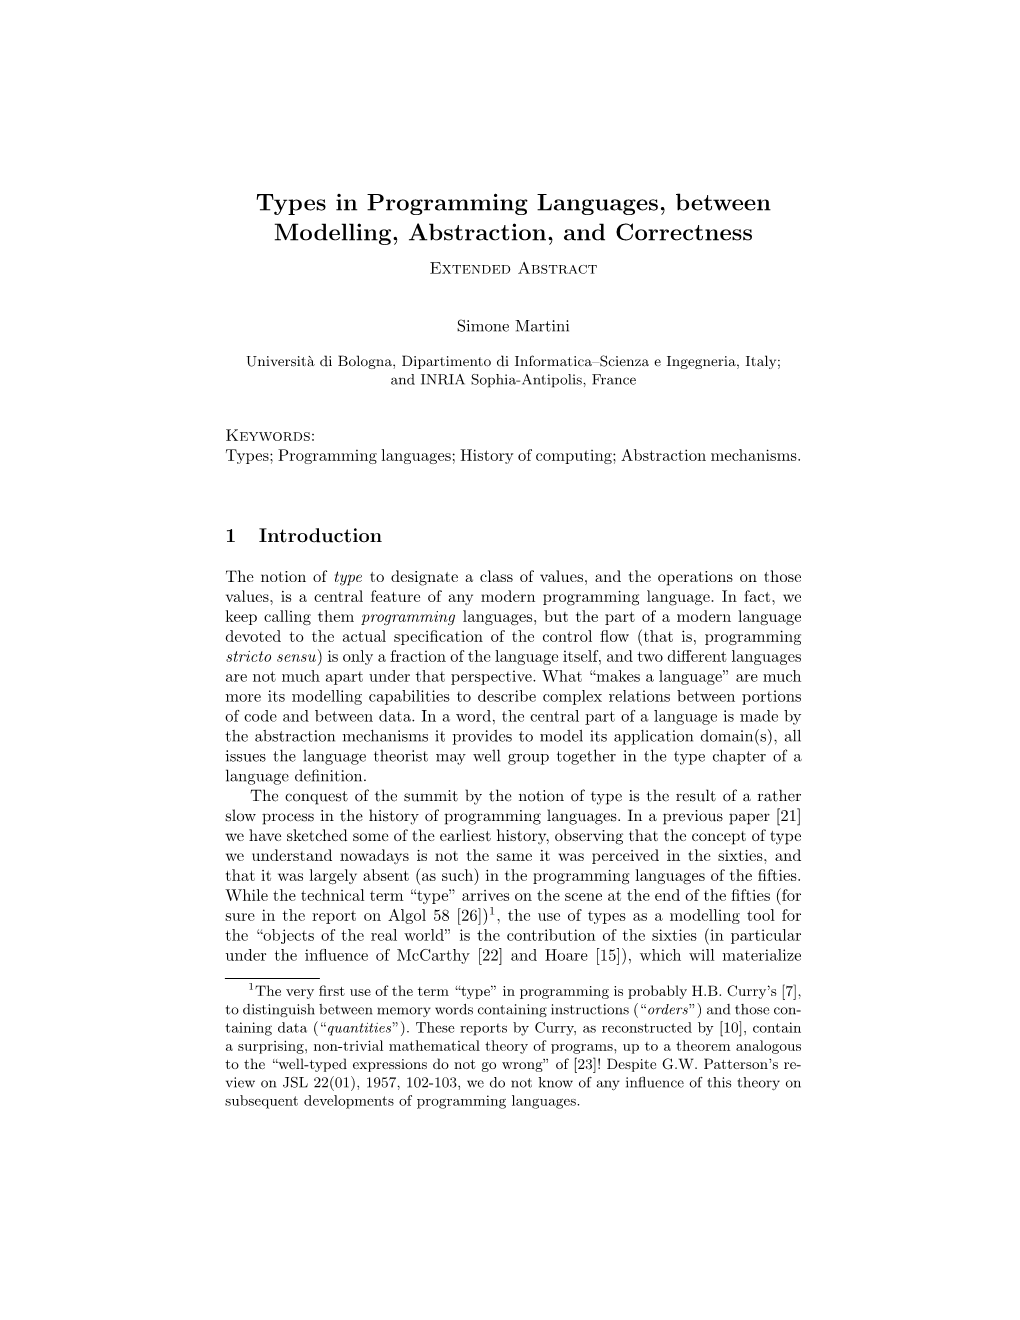 Types in Programming Languages, Between Modelling, Abstraction, and Correctness Extended Abstract